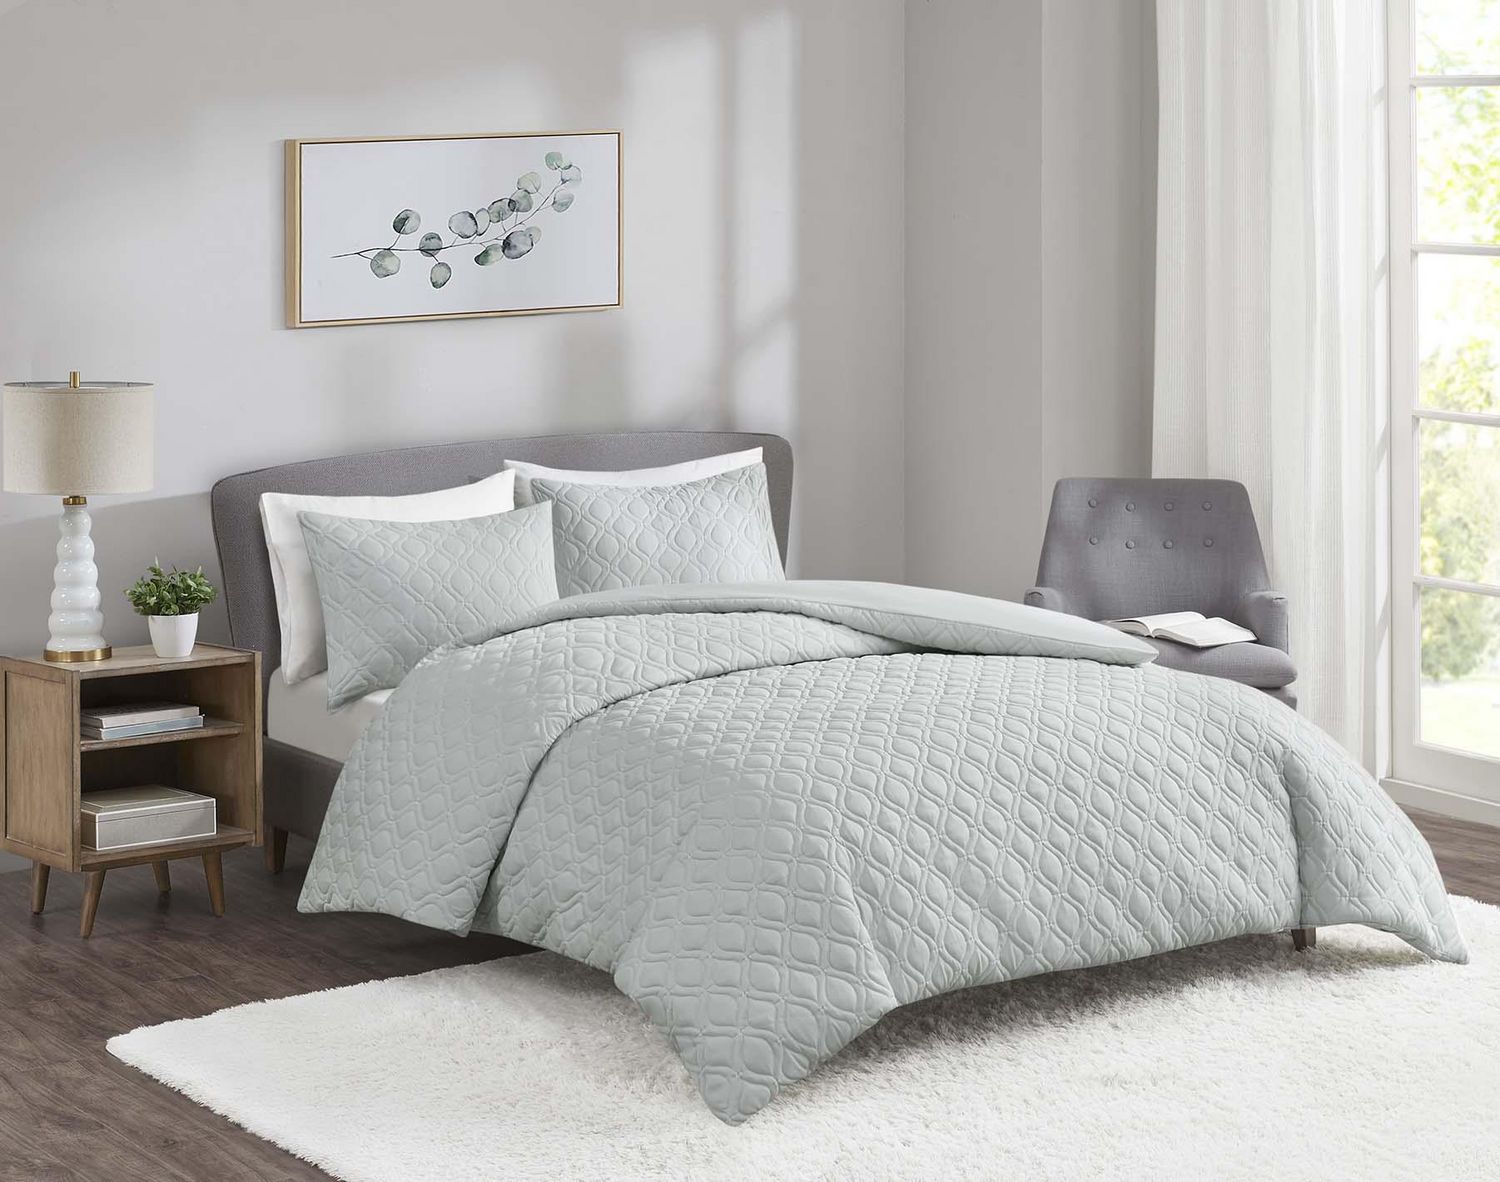 Hometrends 4pc Quilted Duvet Cover Set Walmart Canada